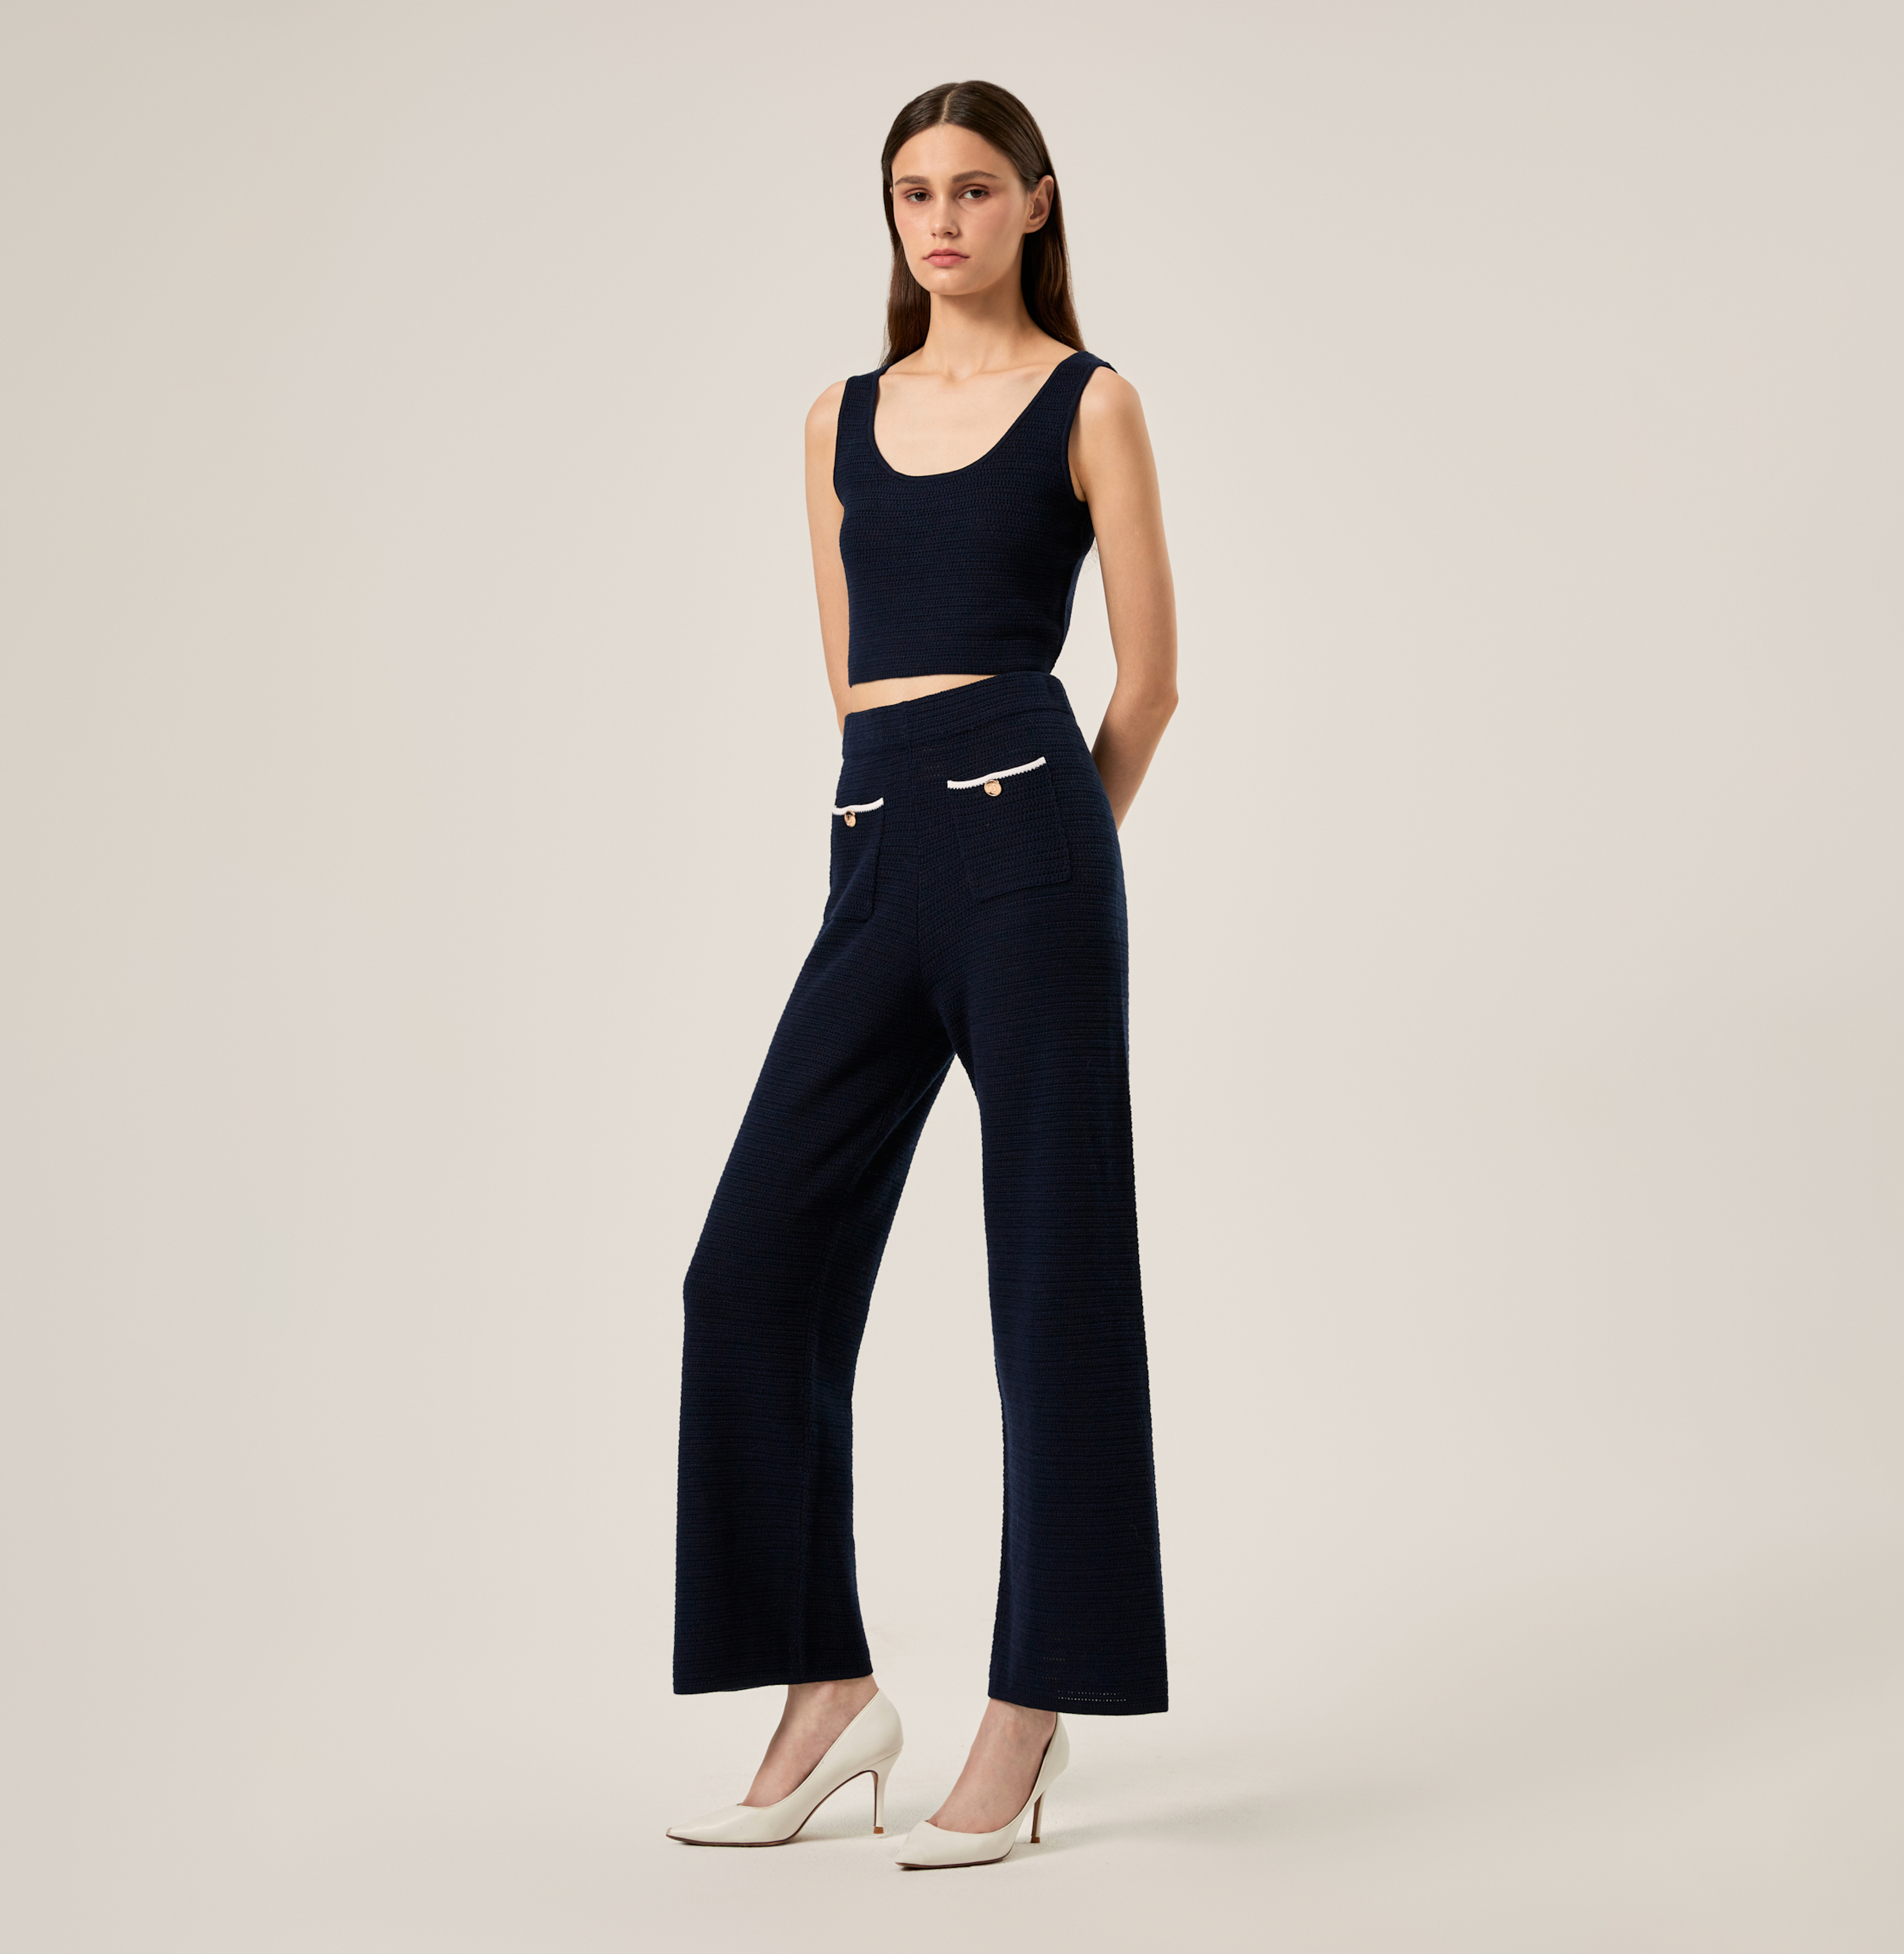 High-Waisted Pointelle-Knit Boot-Cut Pajama Pants